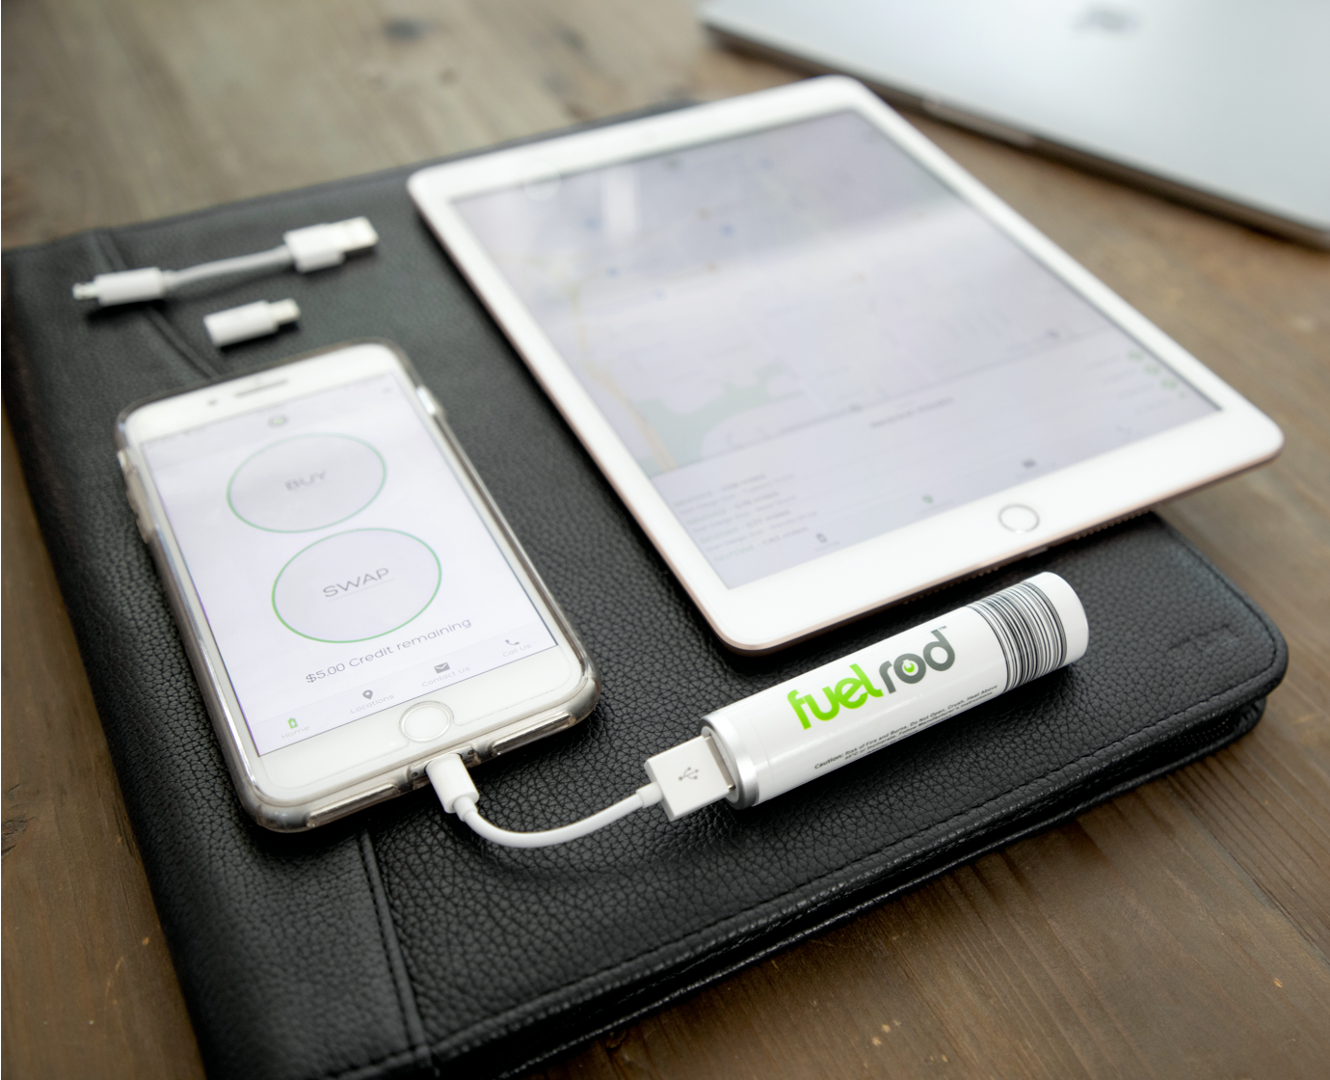 Penn State University now has portable charging service on Campus. FuelRod